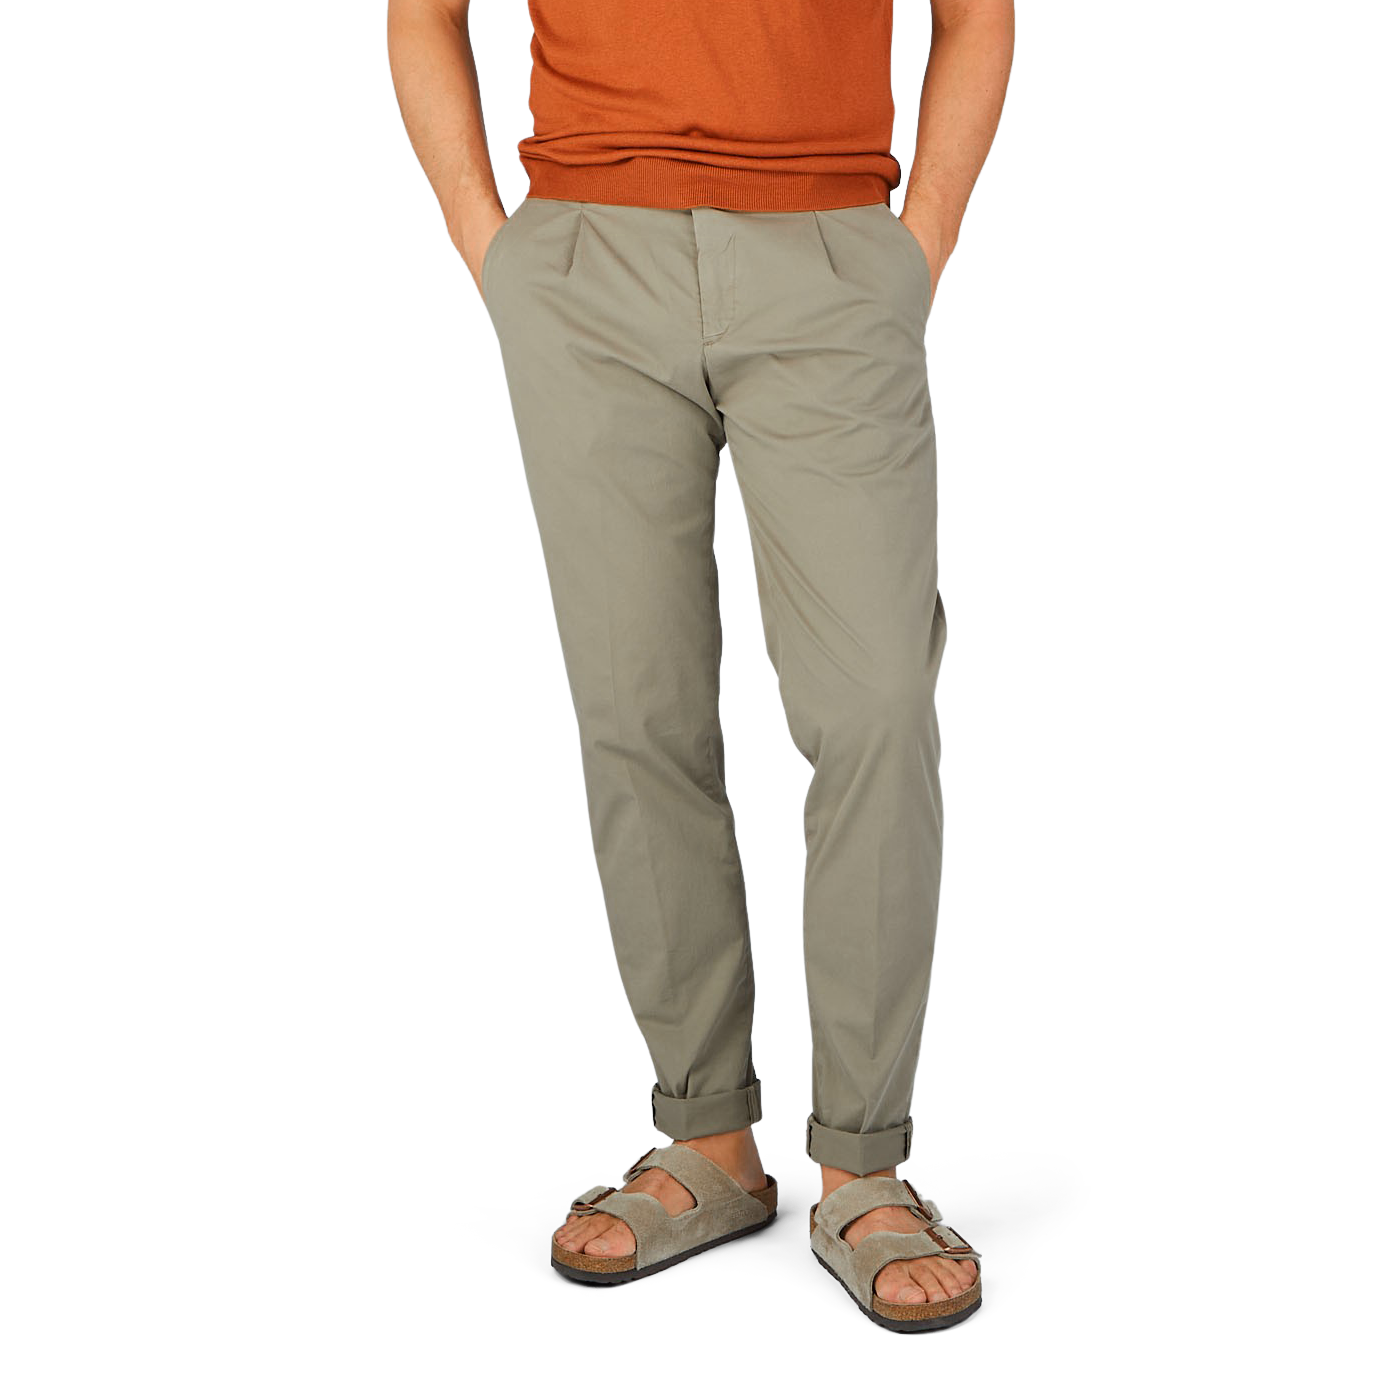 A man wearing Briglia Mole Cotton Stretch BG07 Pleated Chinos and slim fit sandals.